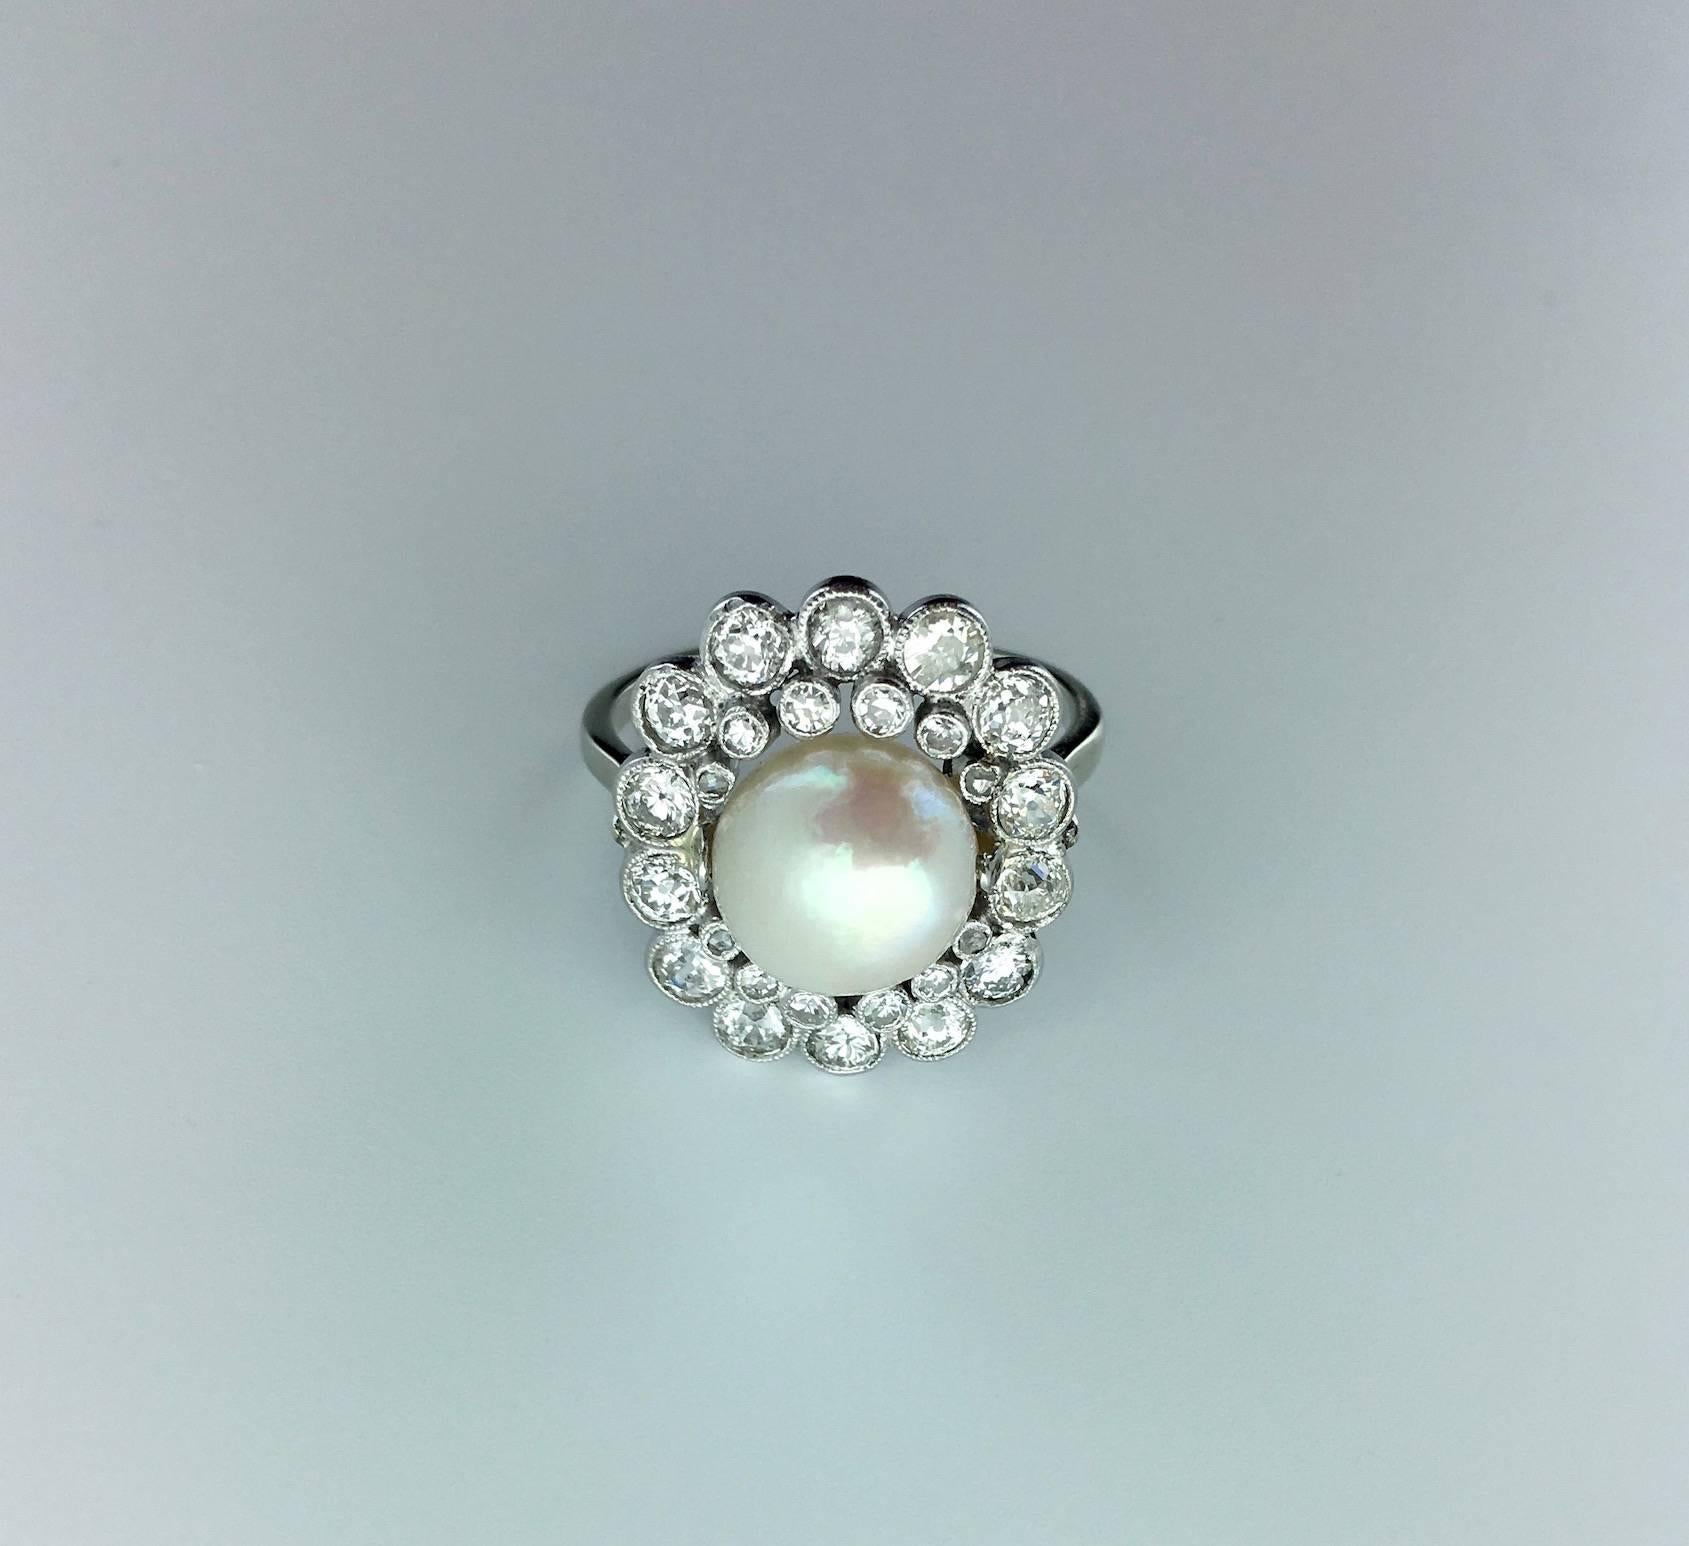 A classical French Belle Epoque model reminding Coco Chanel's inspiration, this Natural Pearl is a beauty, correct size with some light pink reflects surrounded by Old mine cut Diamond on Platinum. A Flower stylized.
Circa 1910.
French marks.

Gross